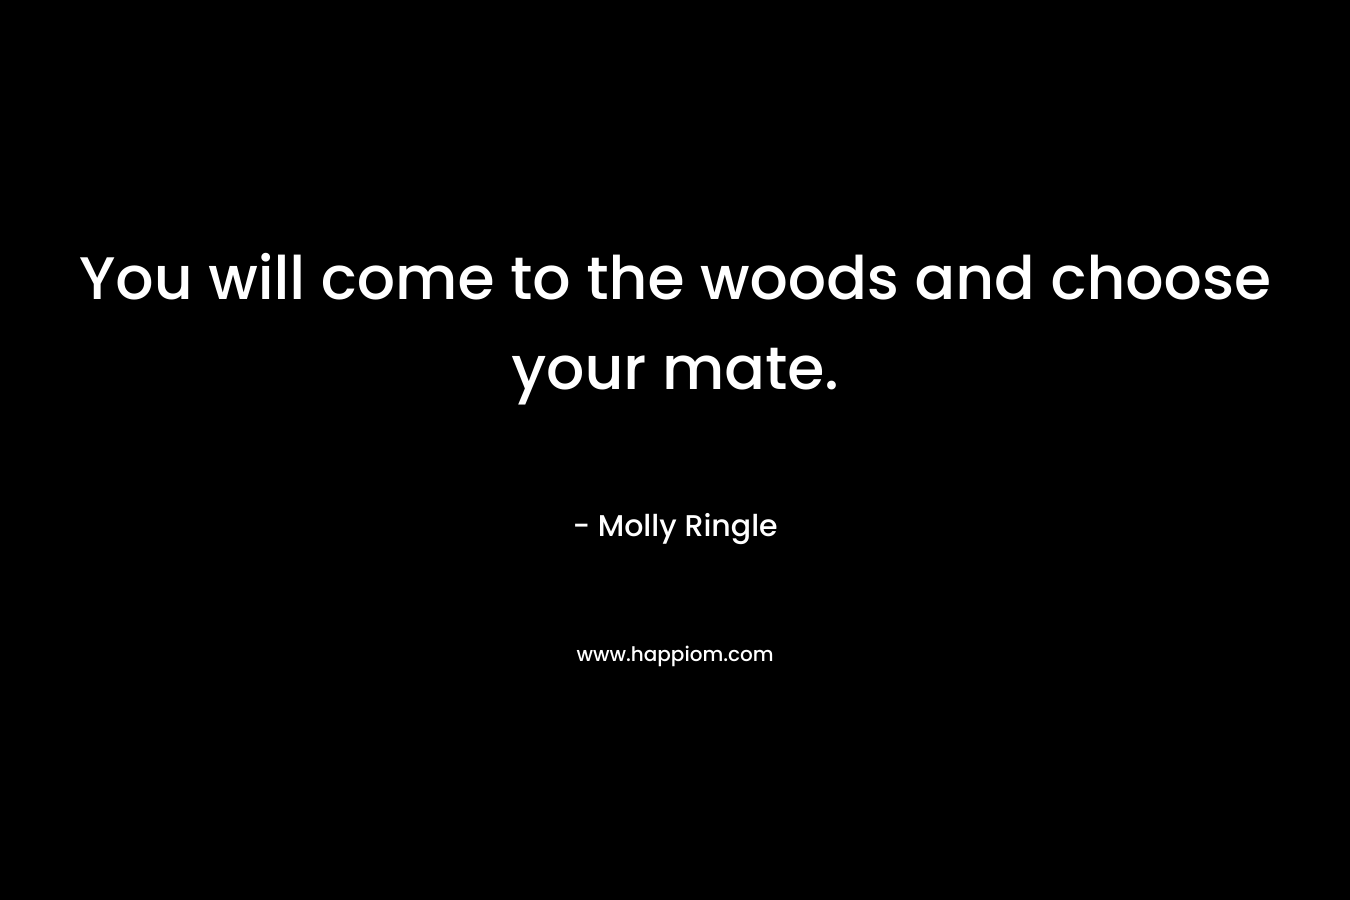 You will come to the woods and choose your mate.